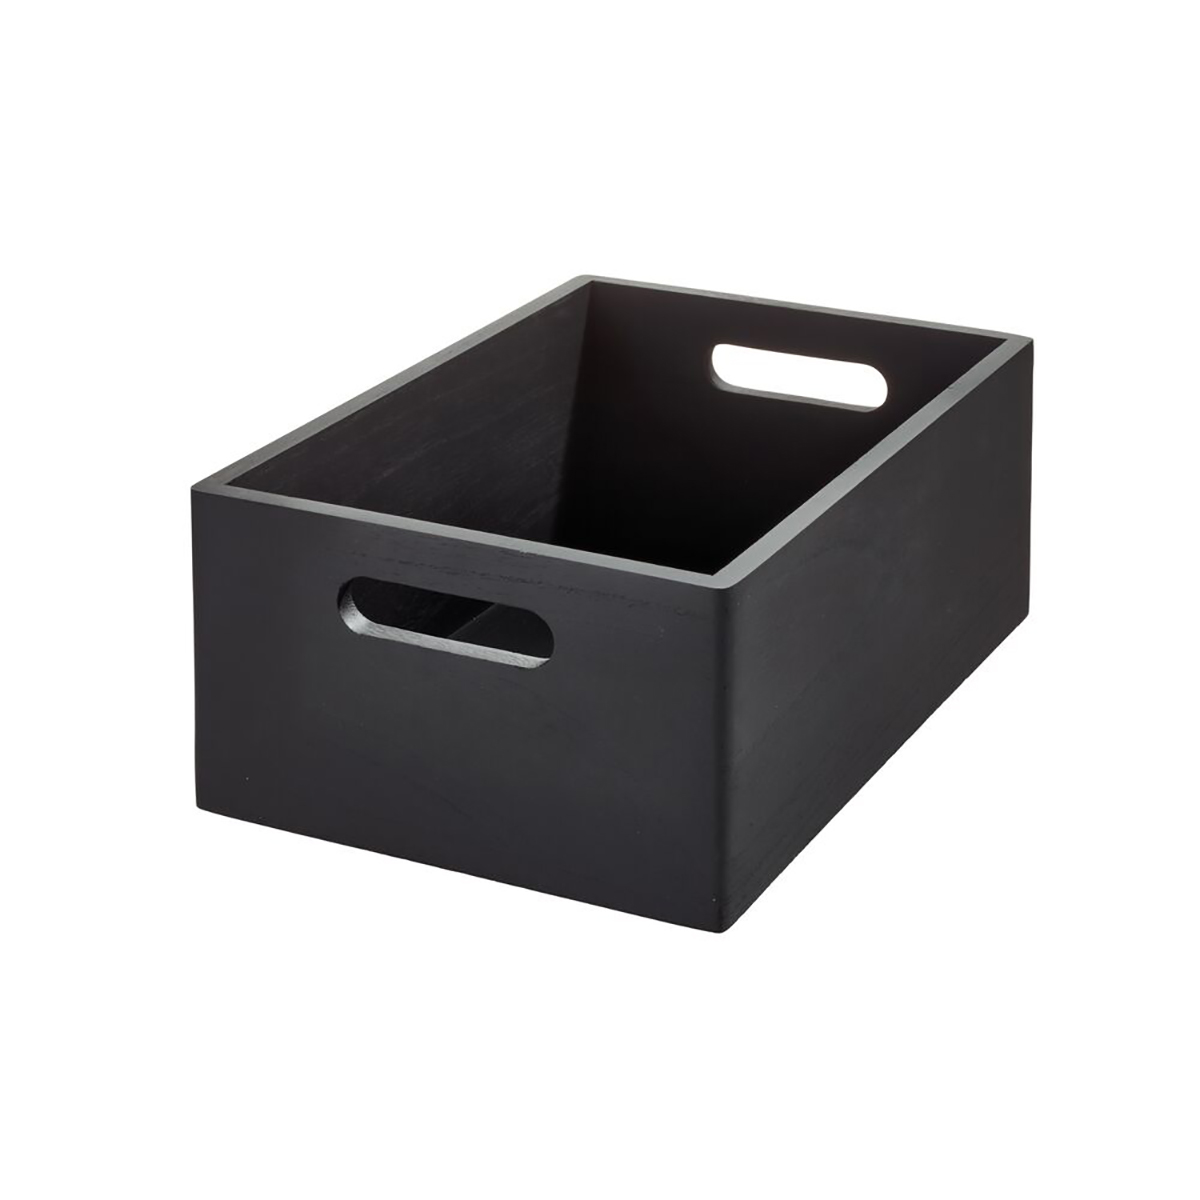 https://www.containerstore.com/catalogimages/415408/10084465-THE-SUS-Lg-All-Purpose-Bin-.jpg